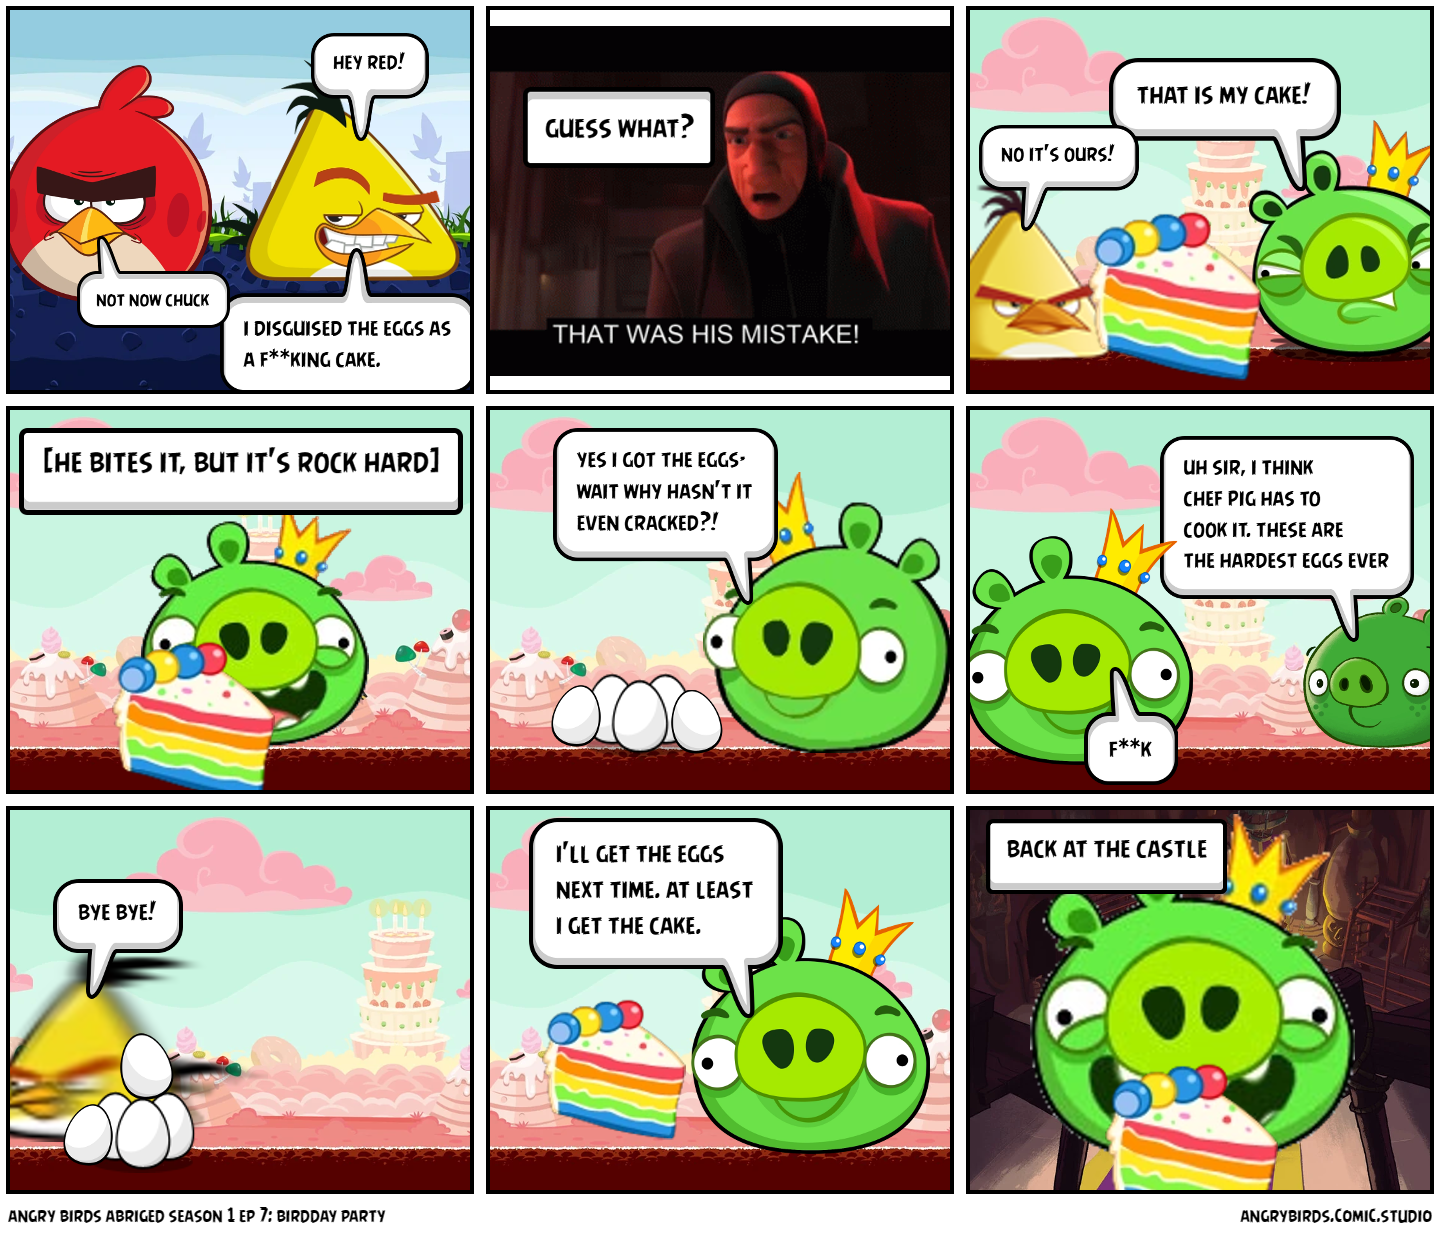 angry birds abriged season 1 ep 7: birdday party